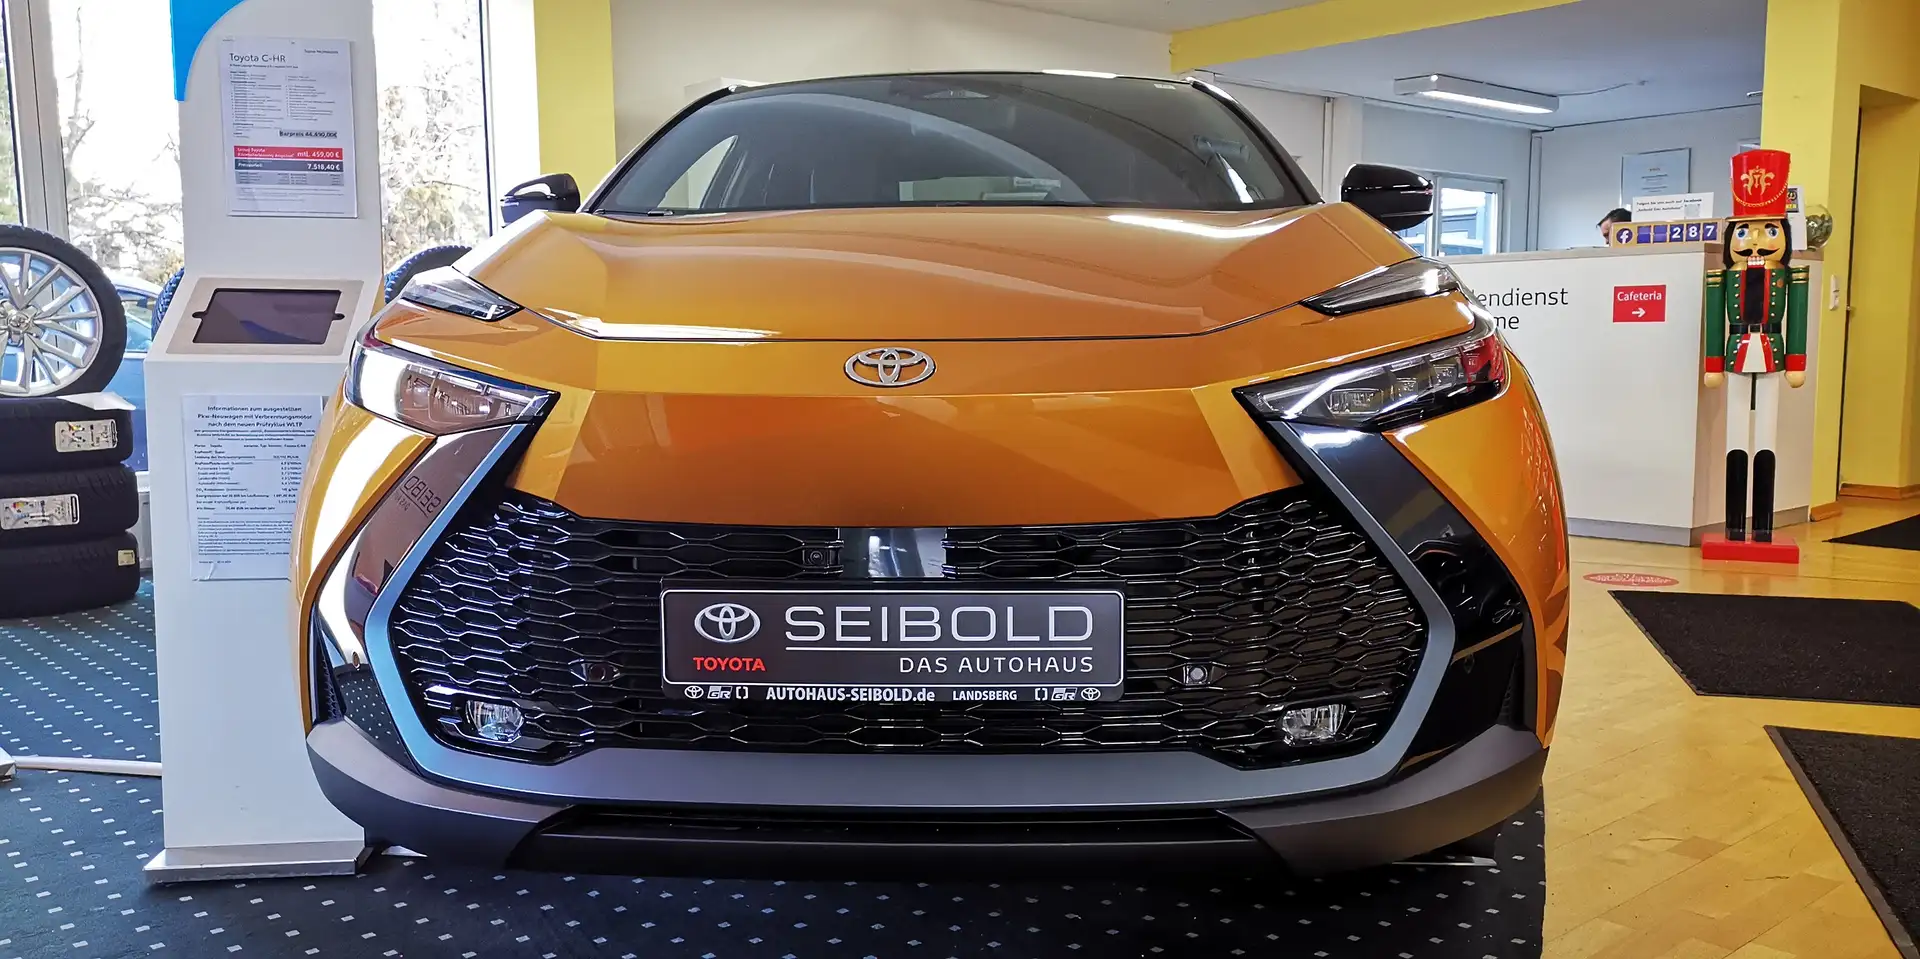 Toyota C-HR 2.0 Hybrid Lounge Premiere "Neues Modell" Or - 1